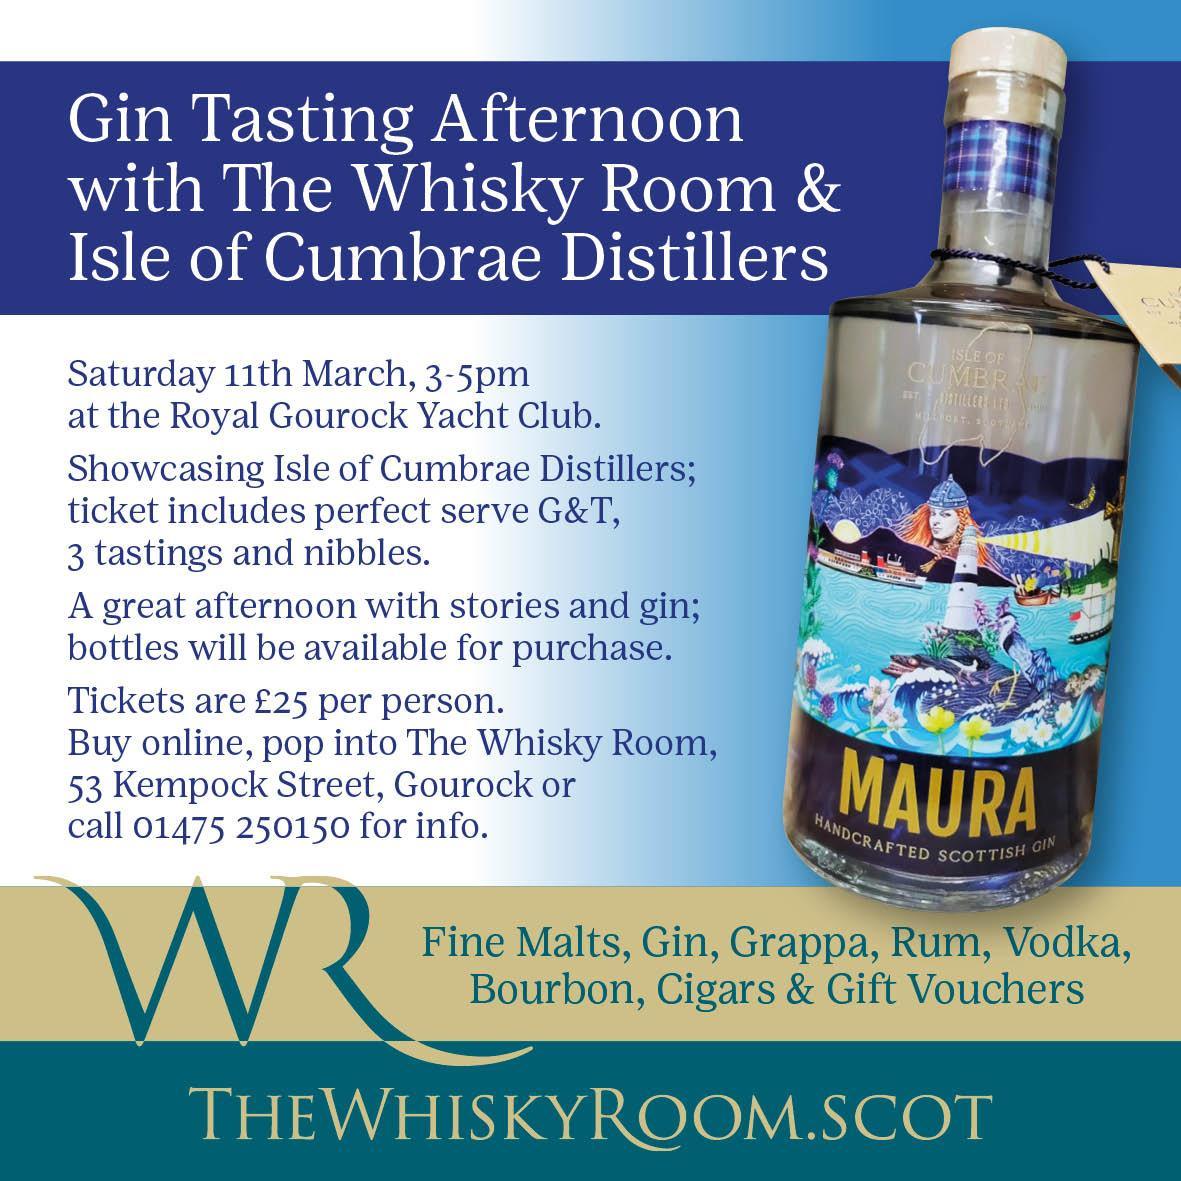 Gin Tasting Afternoon Event, Saturday 11th March with Isle of Cumbrae Distillers